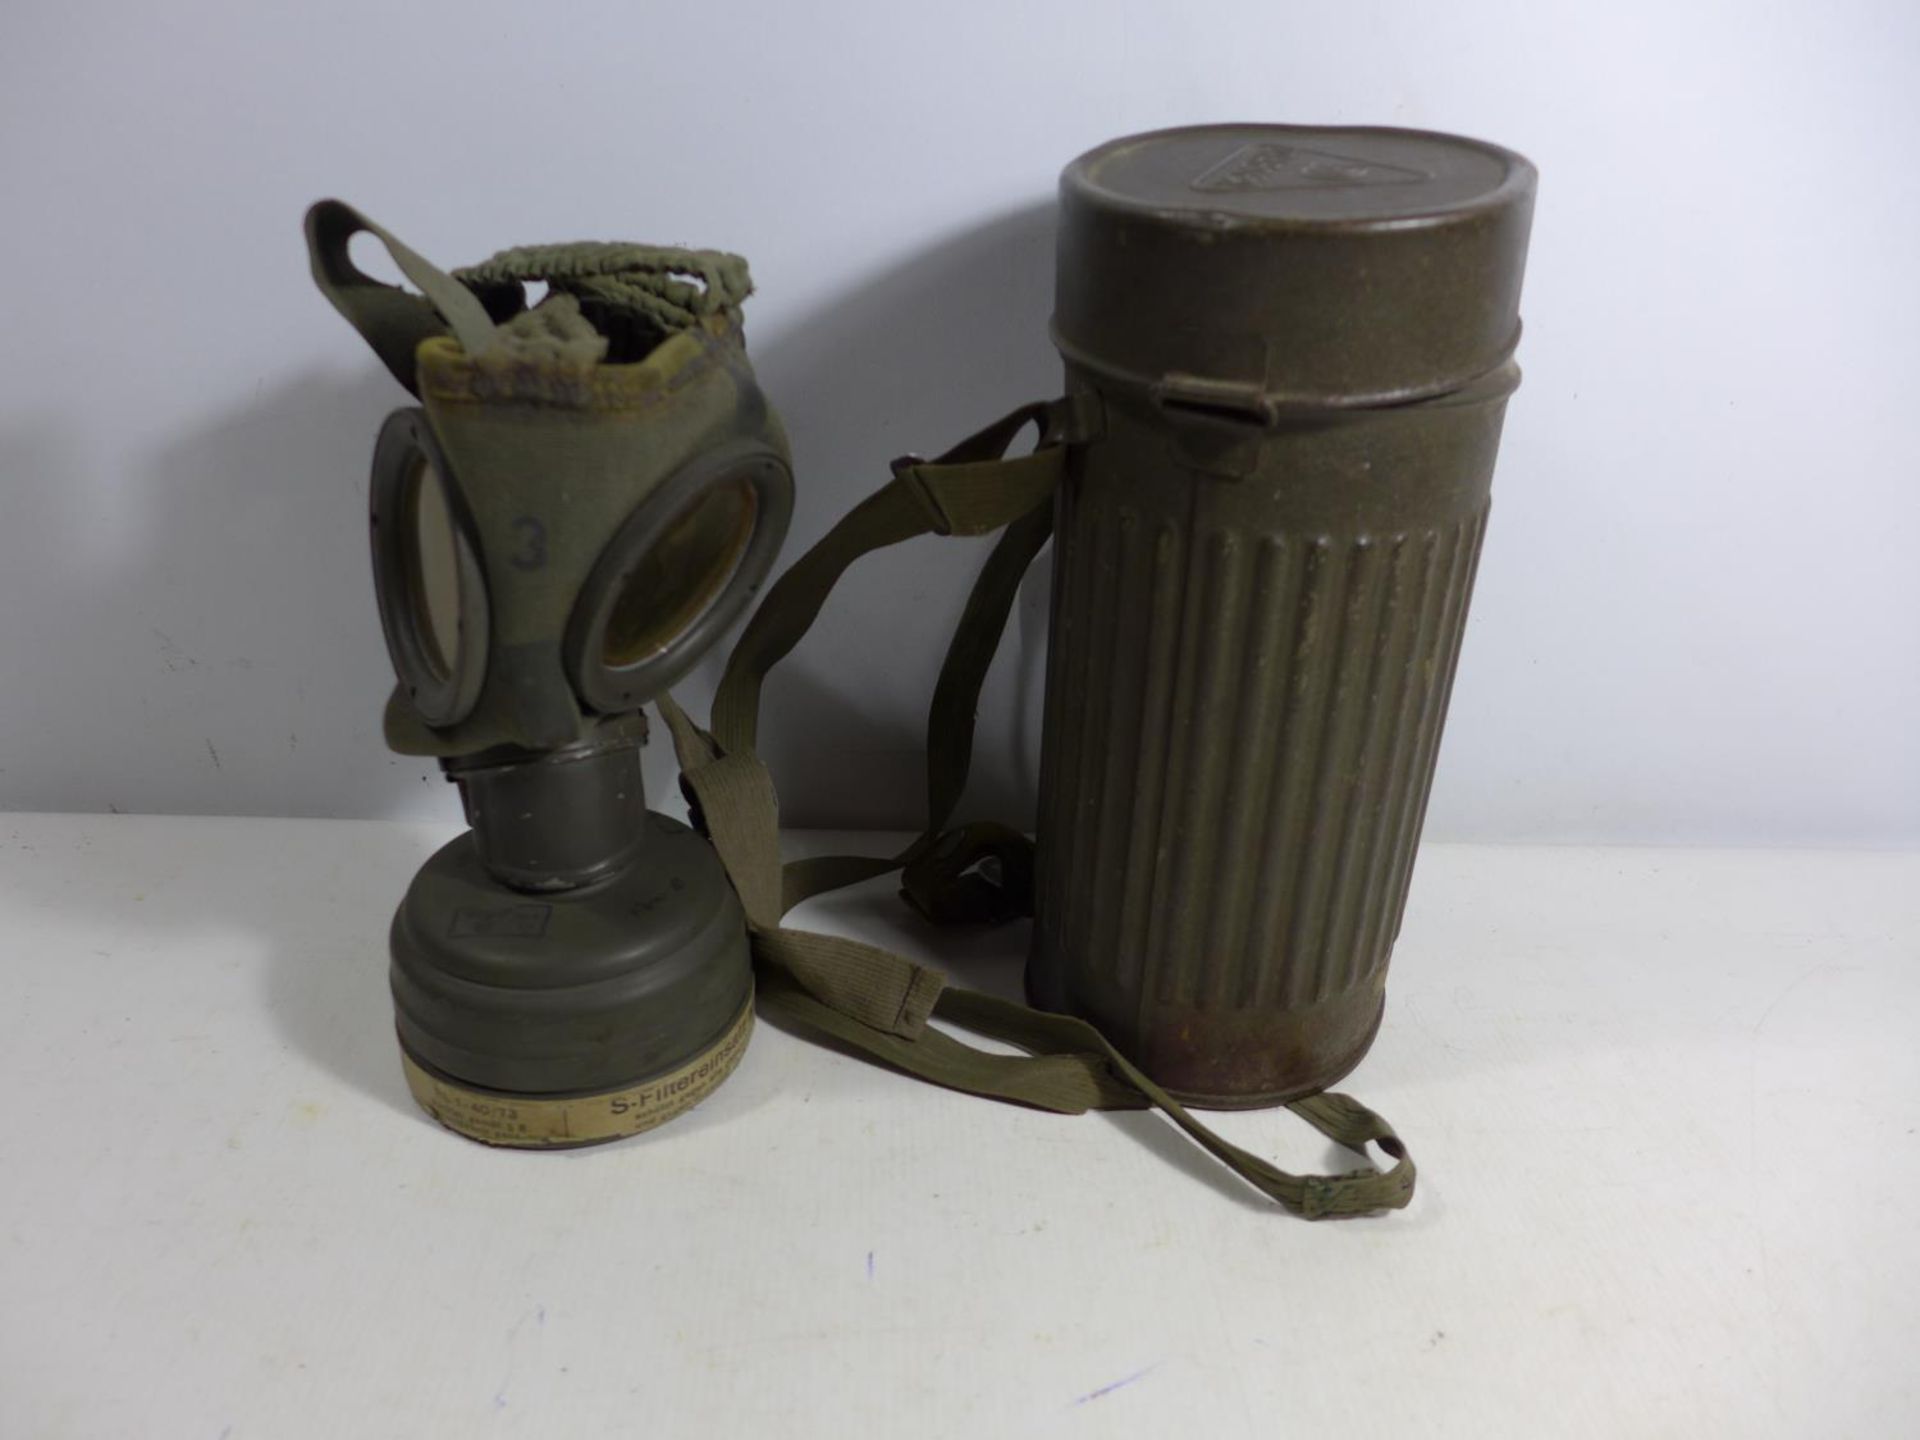 A MID 20TH CENTURY GERMAN GAS MASK AND METAL CONTAINER